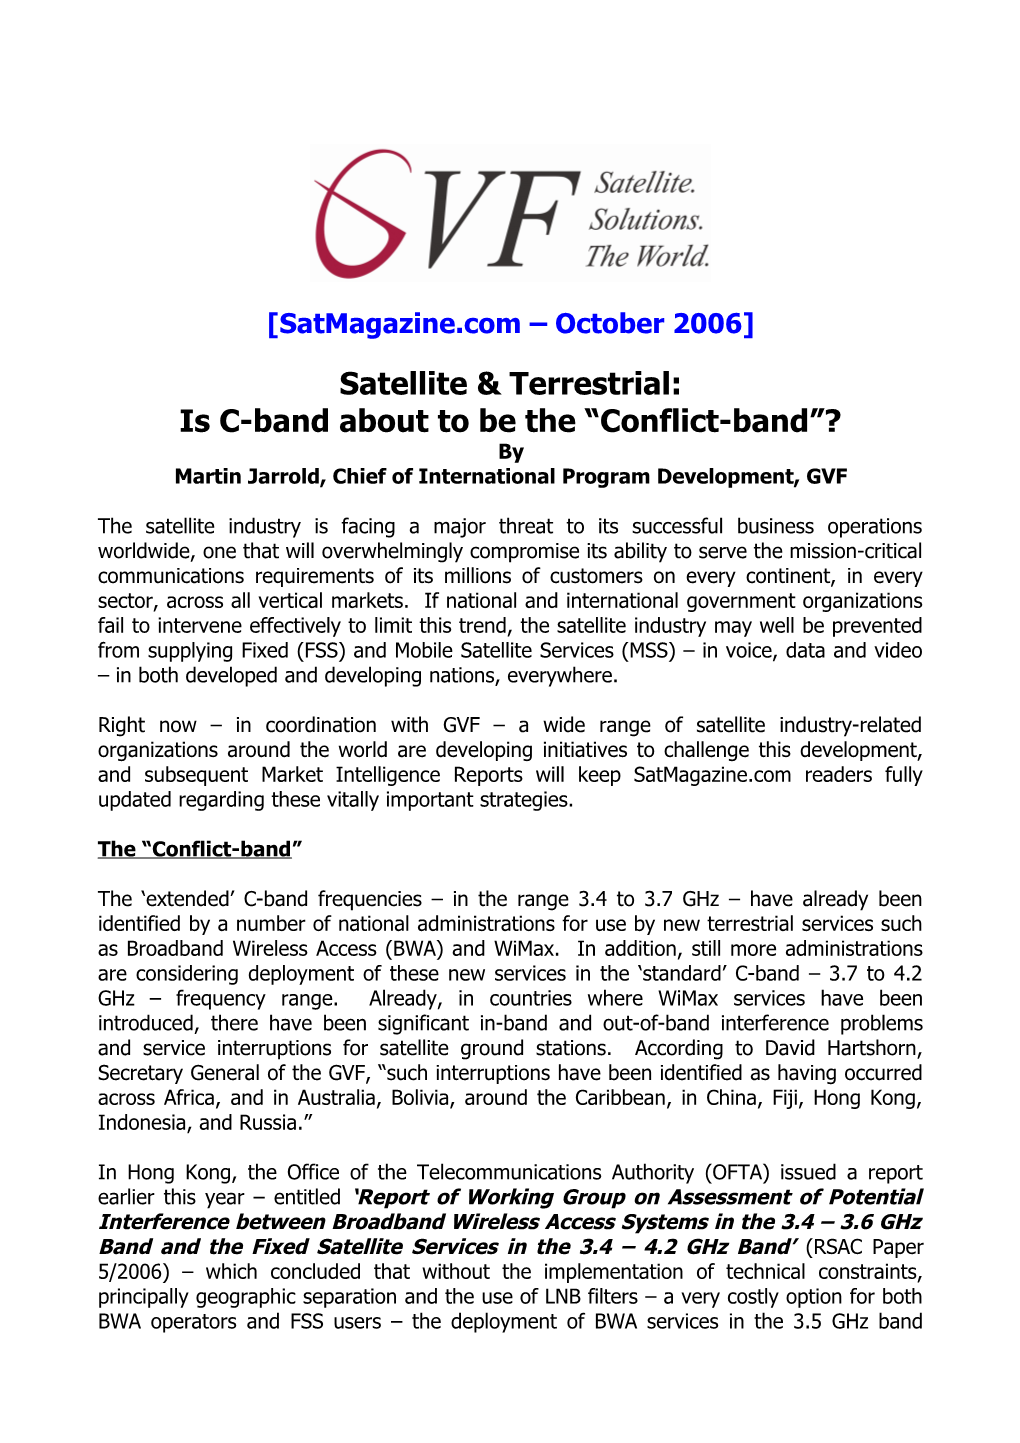 Is C-Band About to Be the Conflict-Band ?